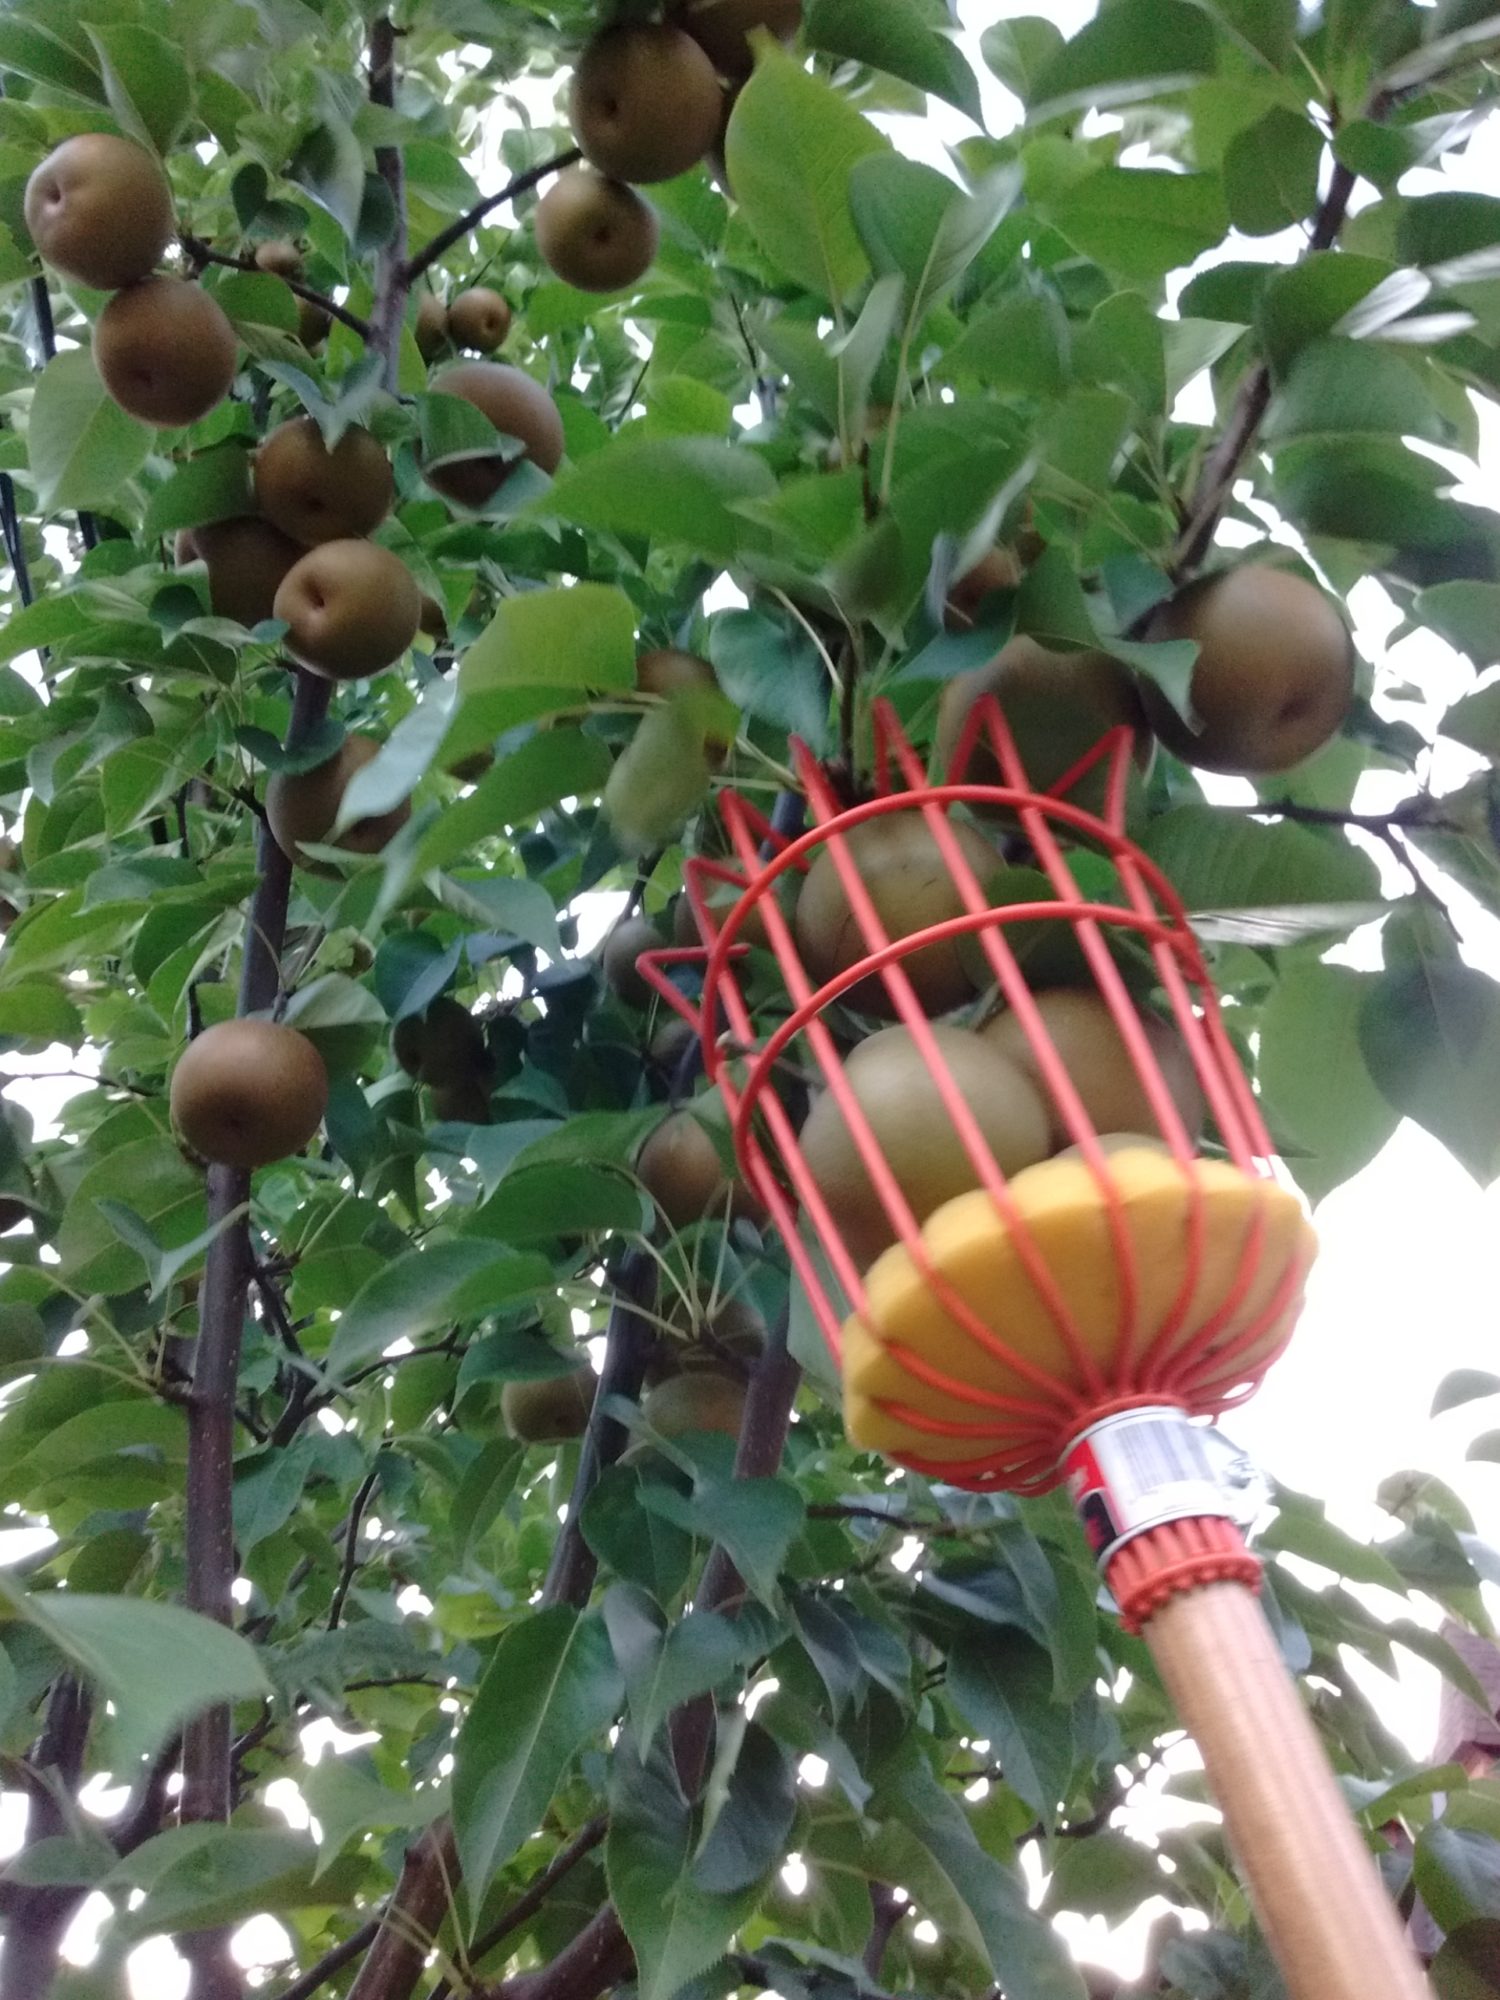 Asian pears are harvested from the tree using a pole picker